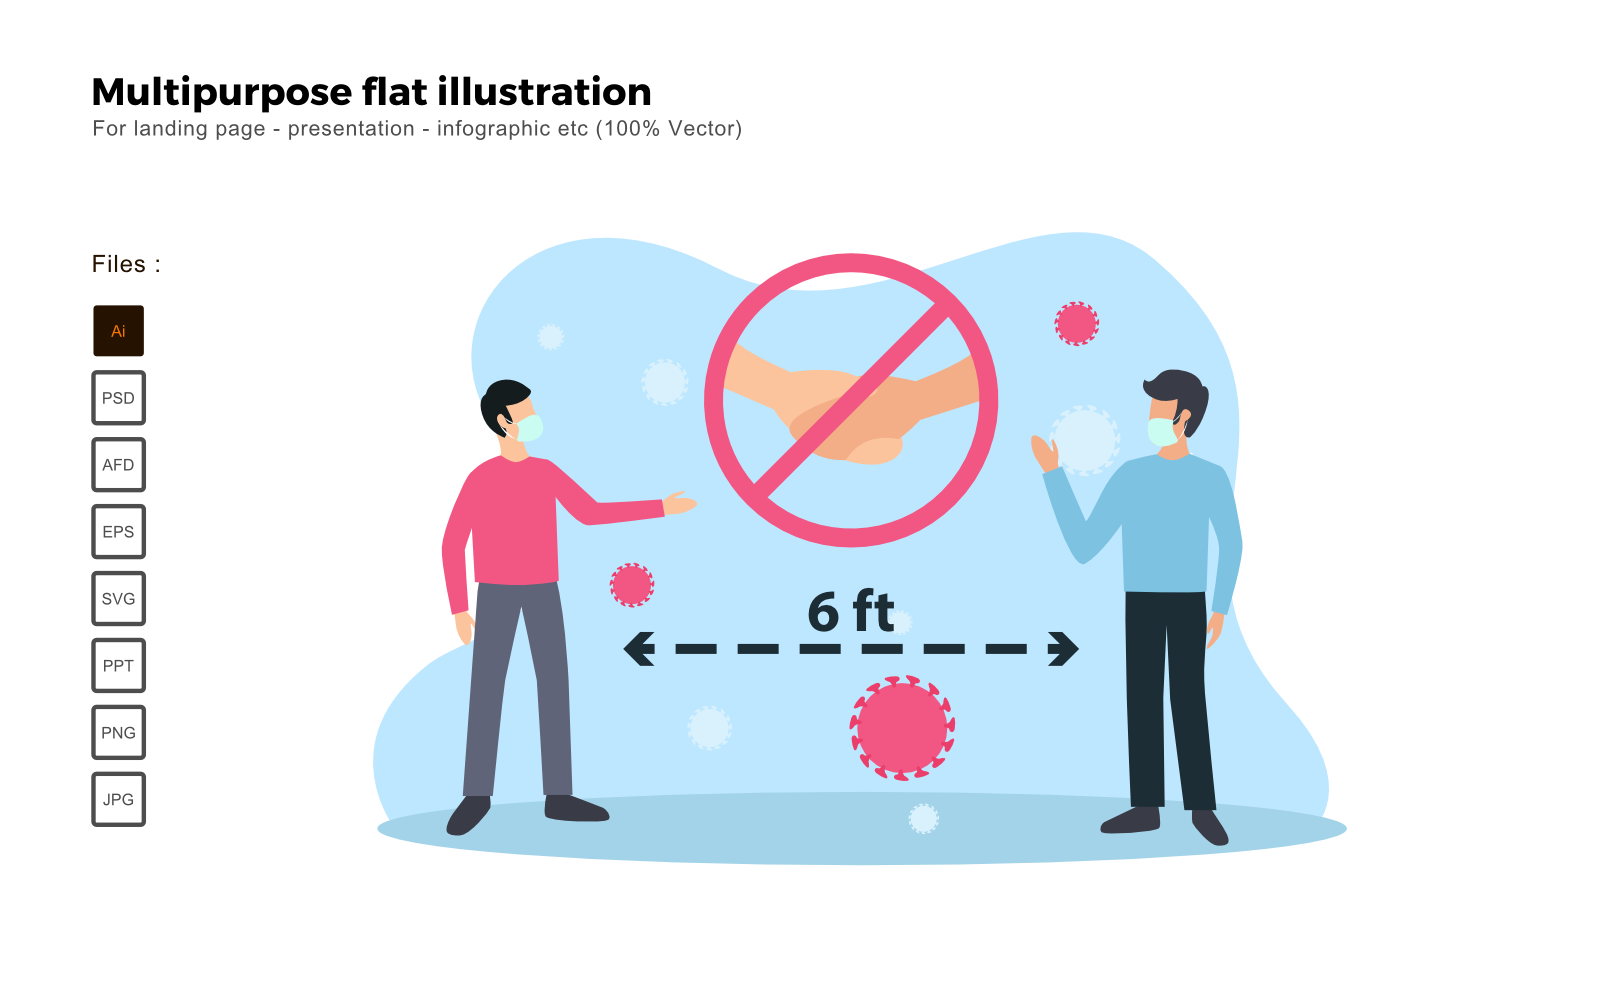 Multipurpose Flat Illustration Physical Distance - Vector Image